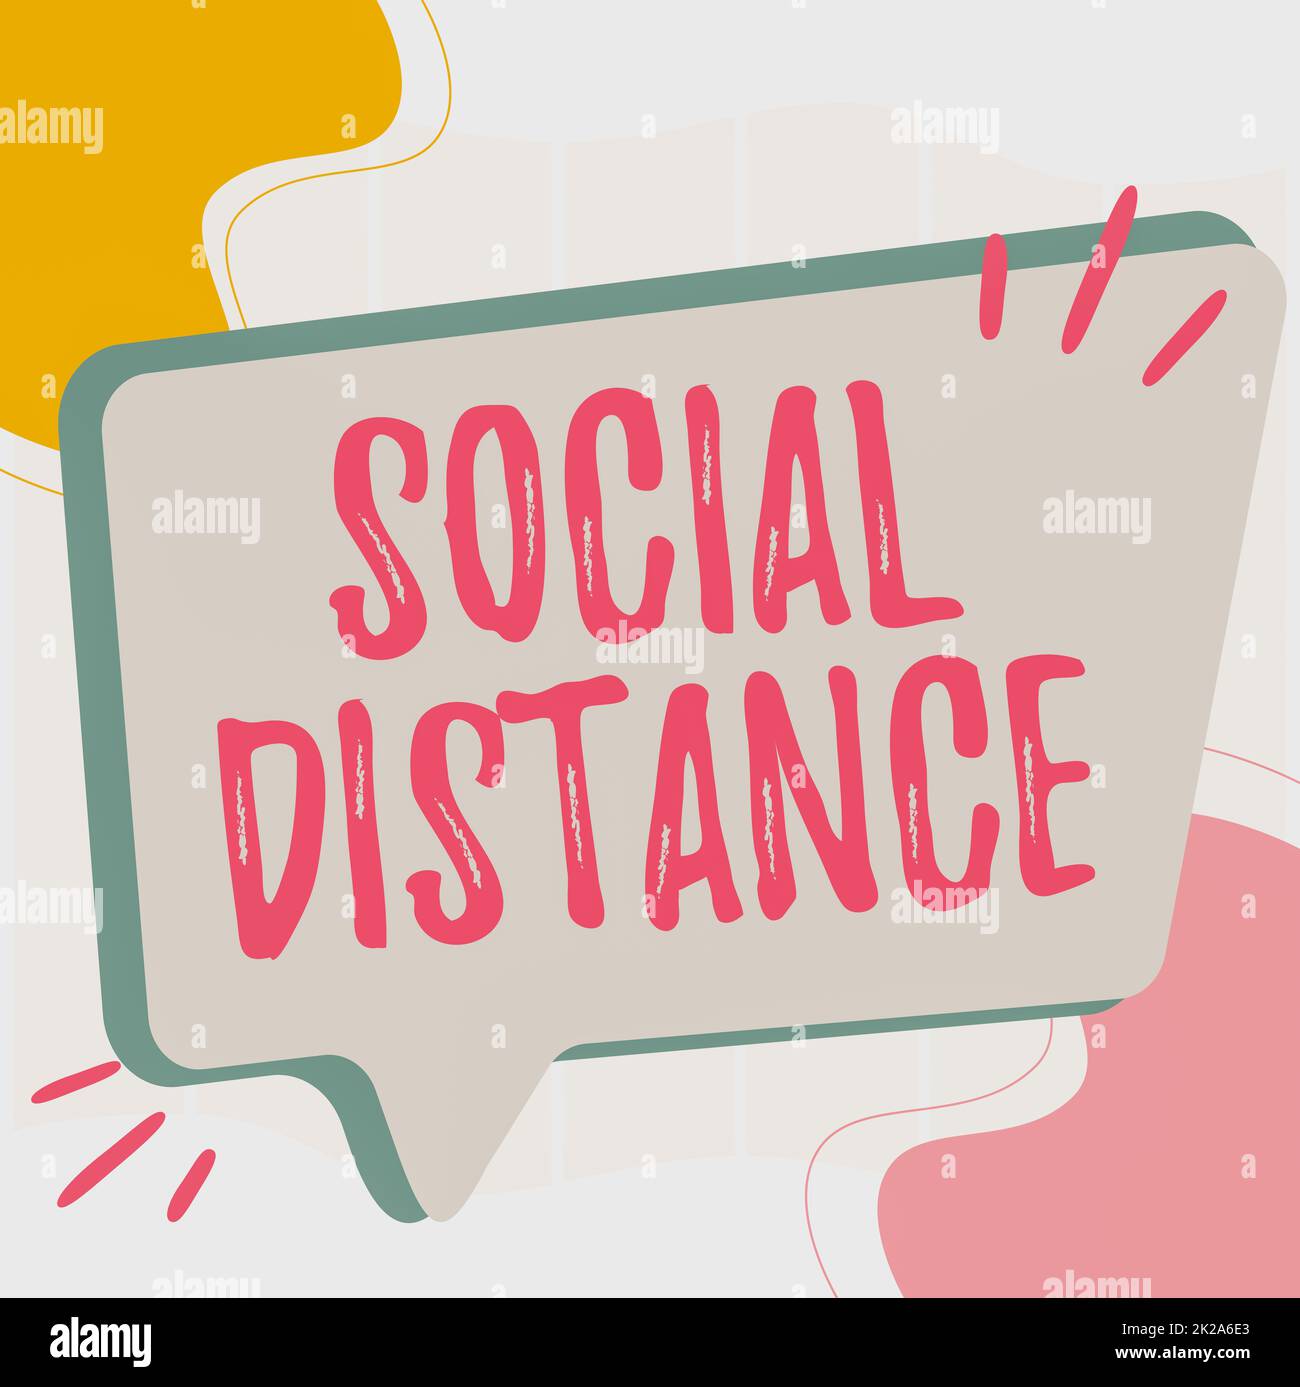 Text showing inspiration Social Distance. Word for maintaining a high interval physical distance for public health safety Illustration Of Empty Big Chat Box For Waiting For Advertisement. Stock Photo